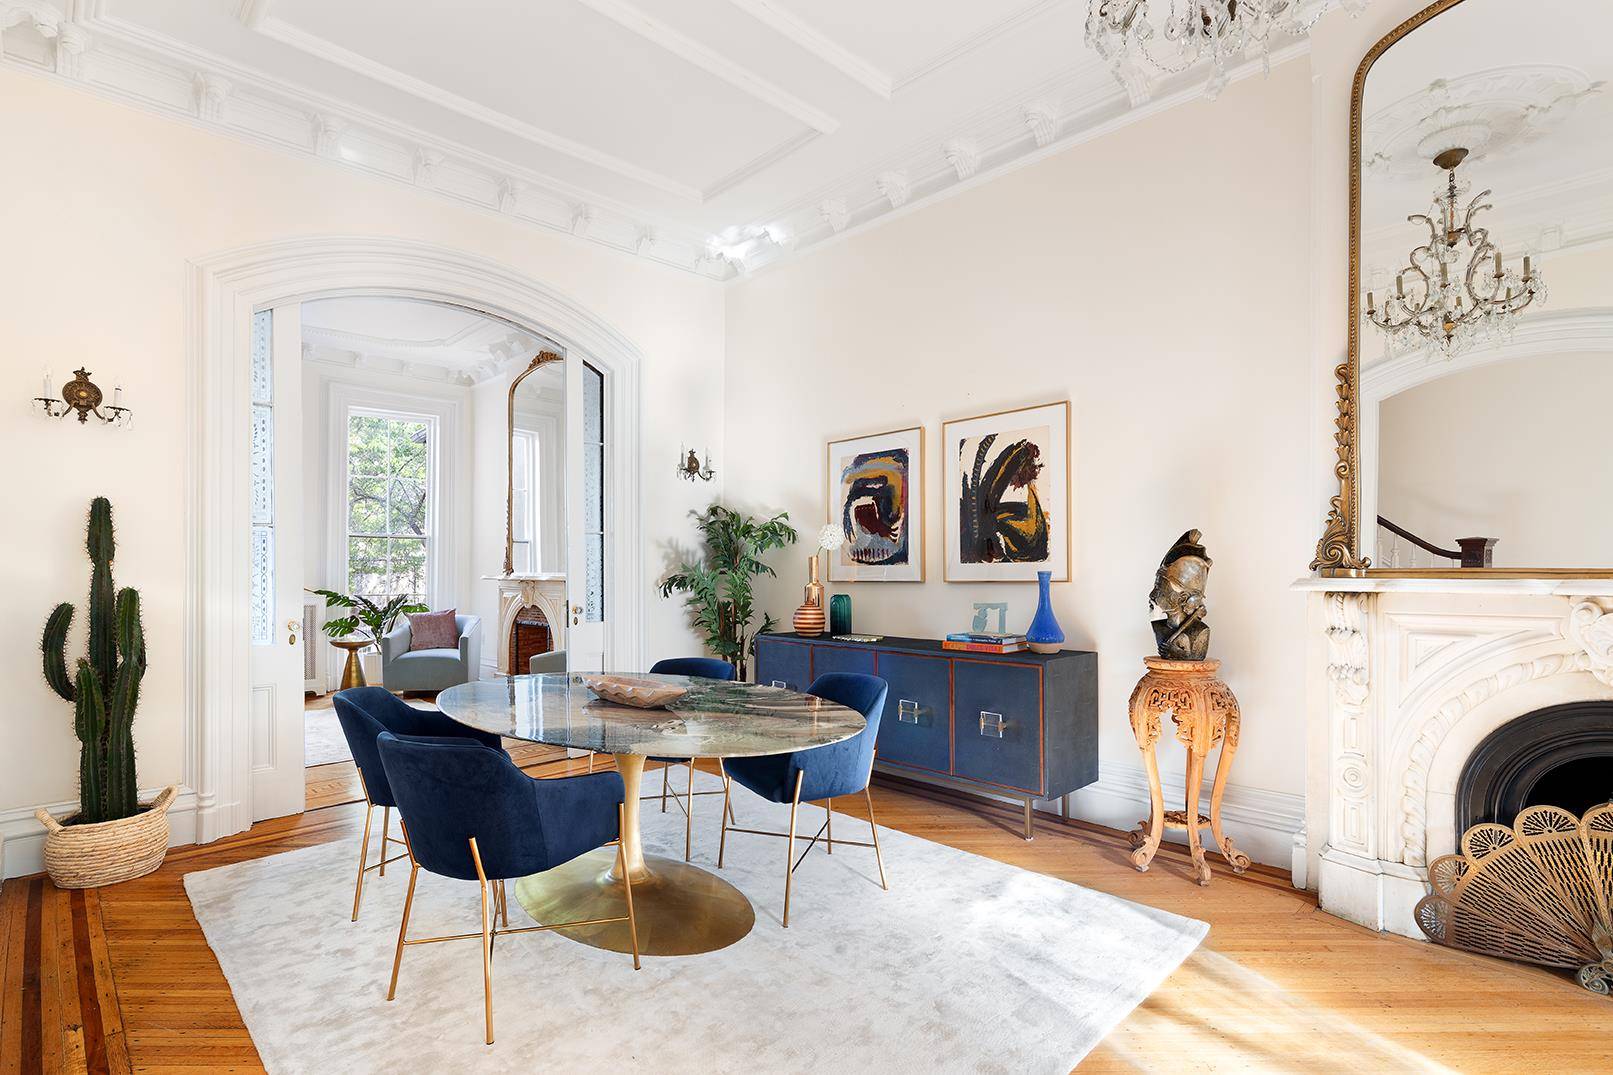 141 St. James is an exquisitely restored and modernized Italianate brownstone built in 1871.